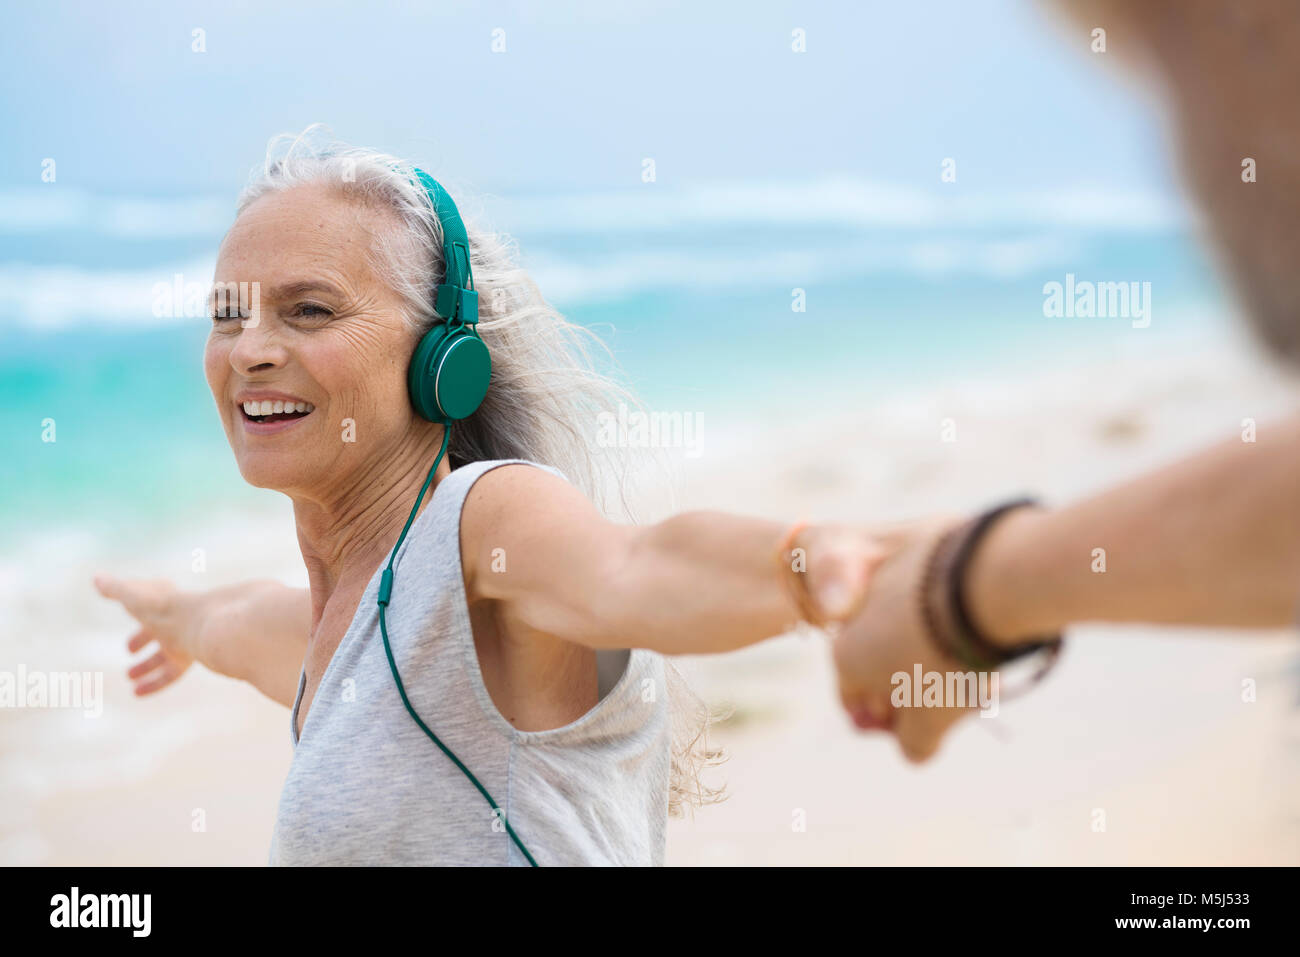 Portrait of beautiful smiling woman dancing on beach Banque D'Images